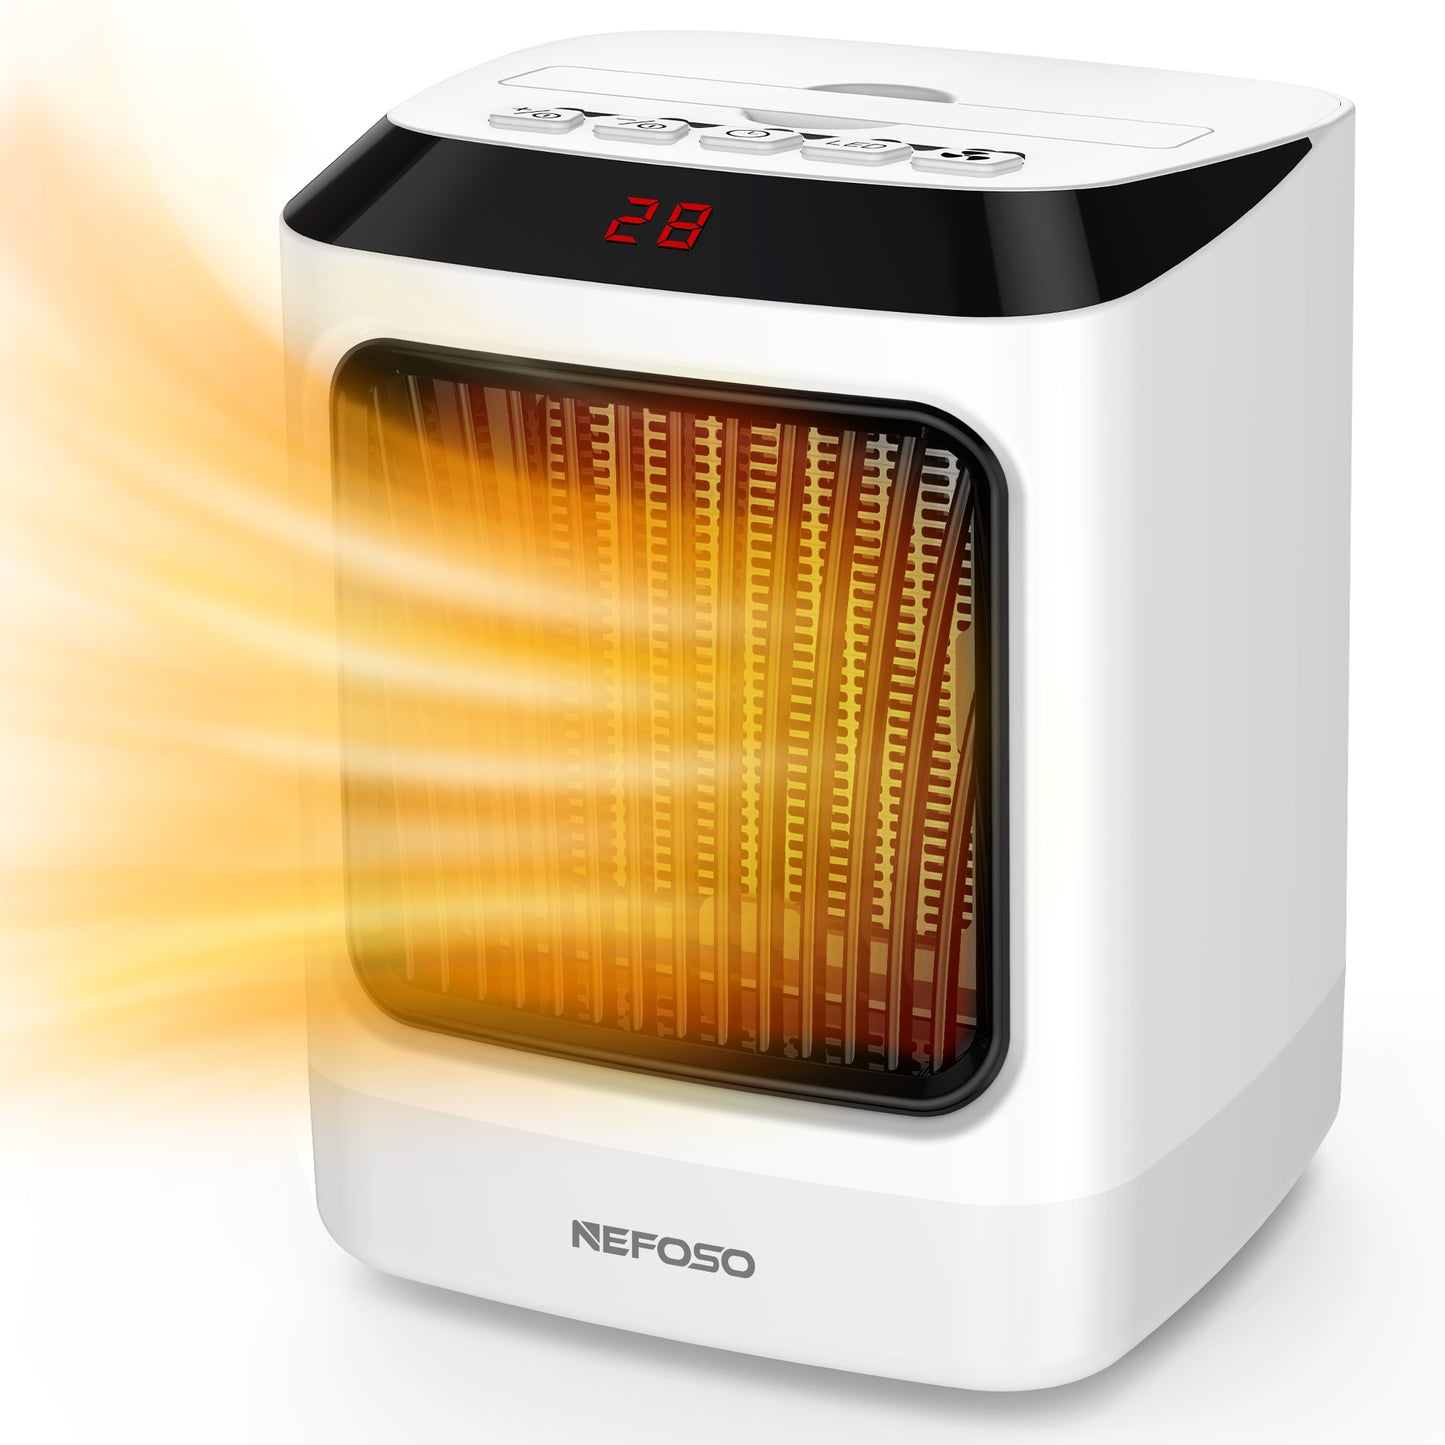 NEFOSO Space Heater, 800W Mini Portable Heater, Desktop Heater with Timing Function, 2 Heating Setting, LED Lights for Office, Bedroom, Kitchen